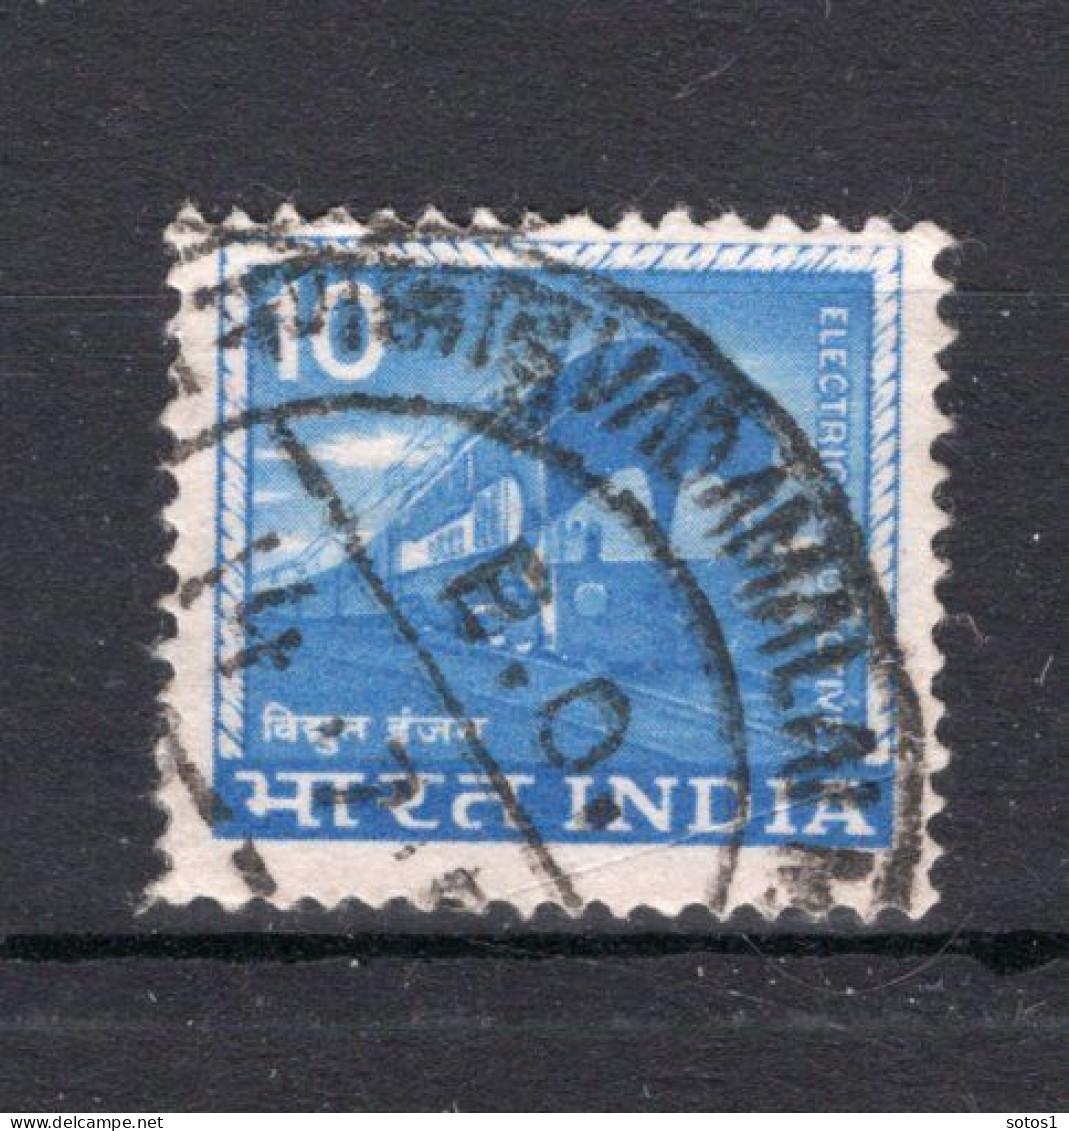 INDIA Yt. 585° Gestempeld 1979 - Used Stamps